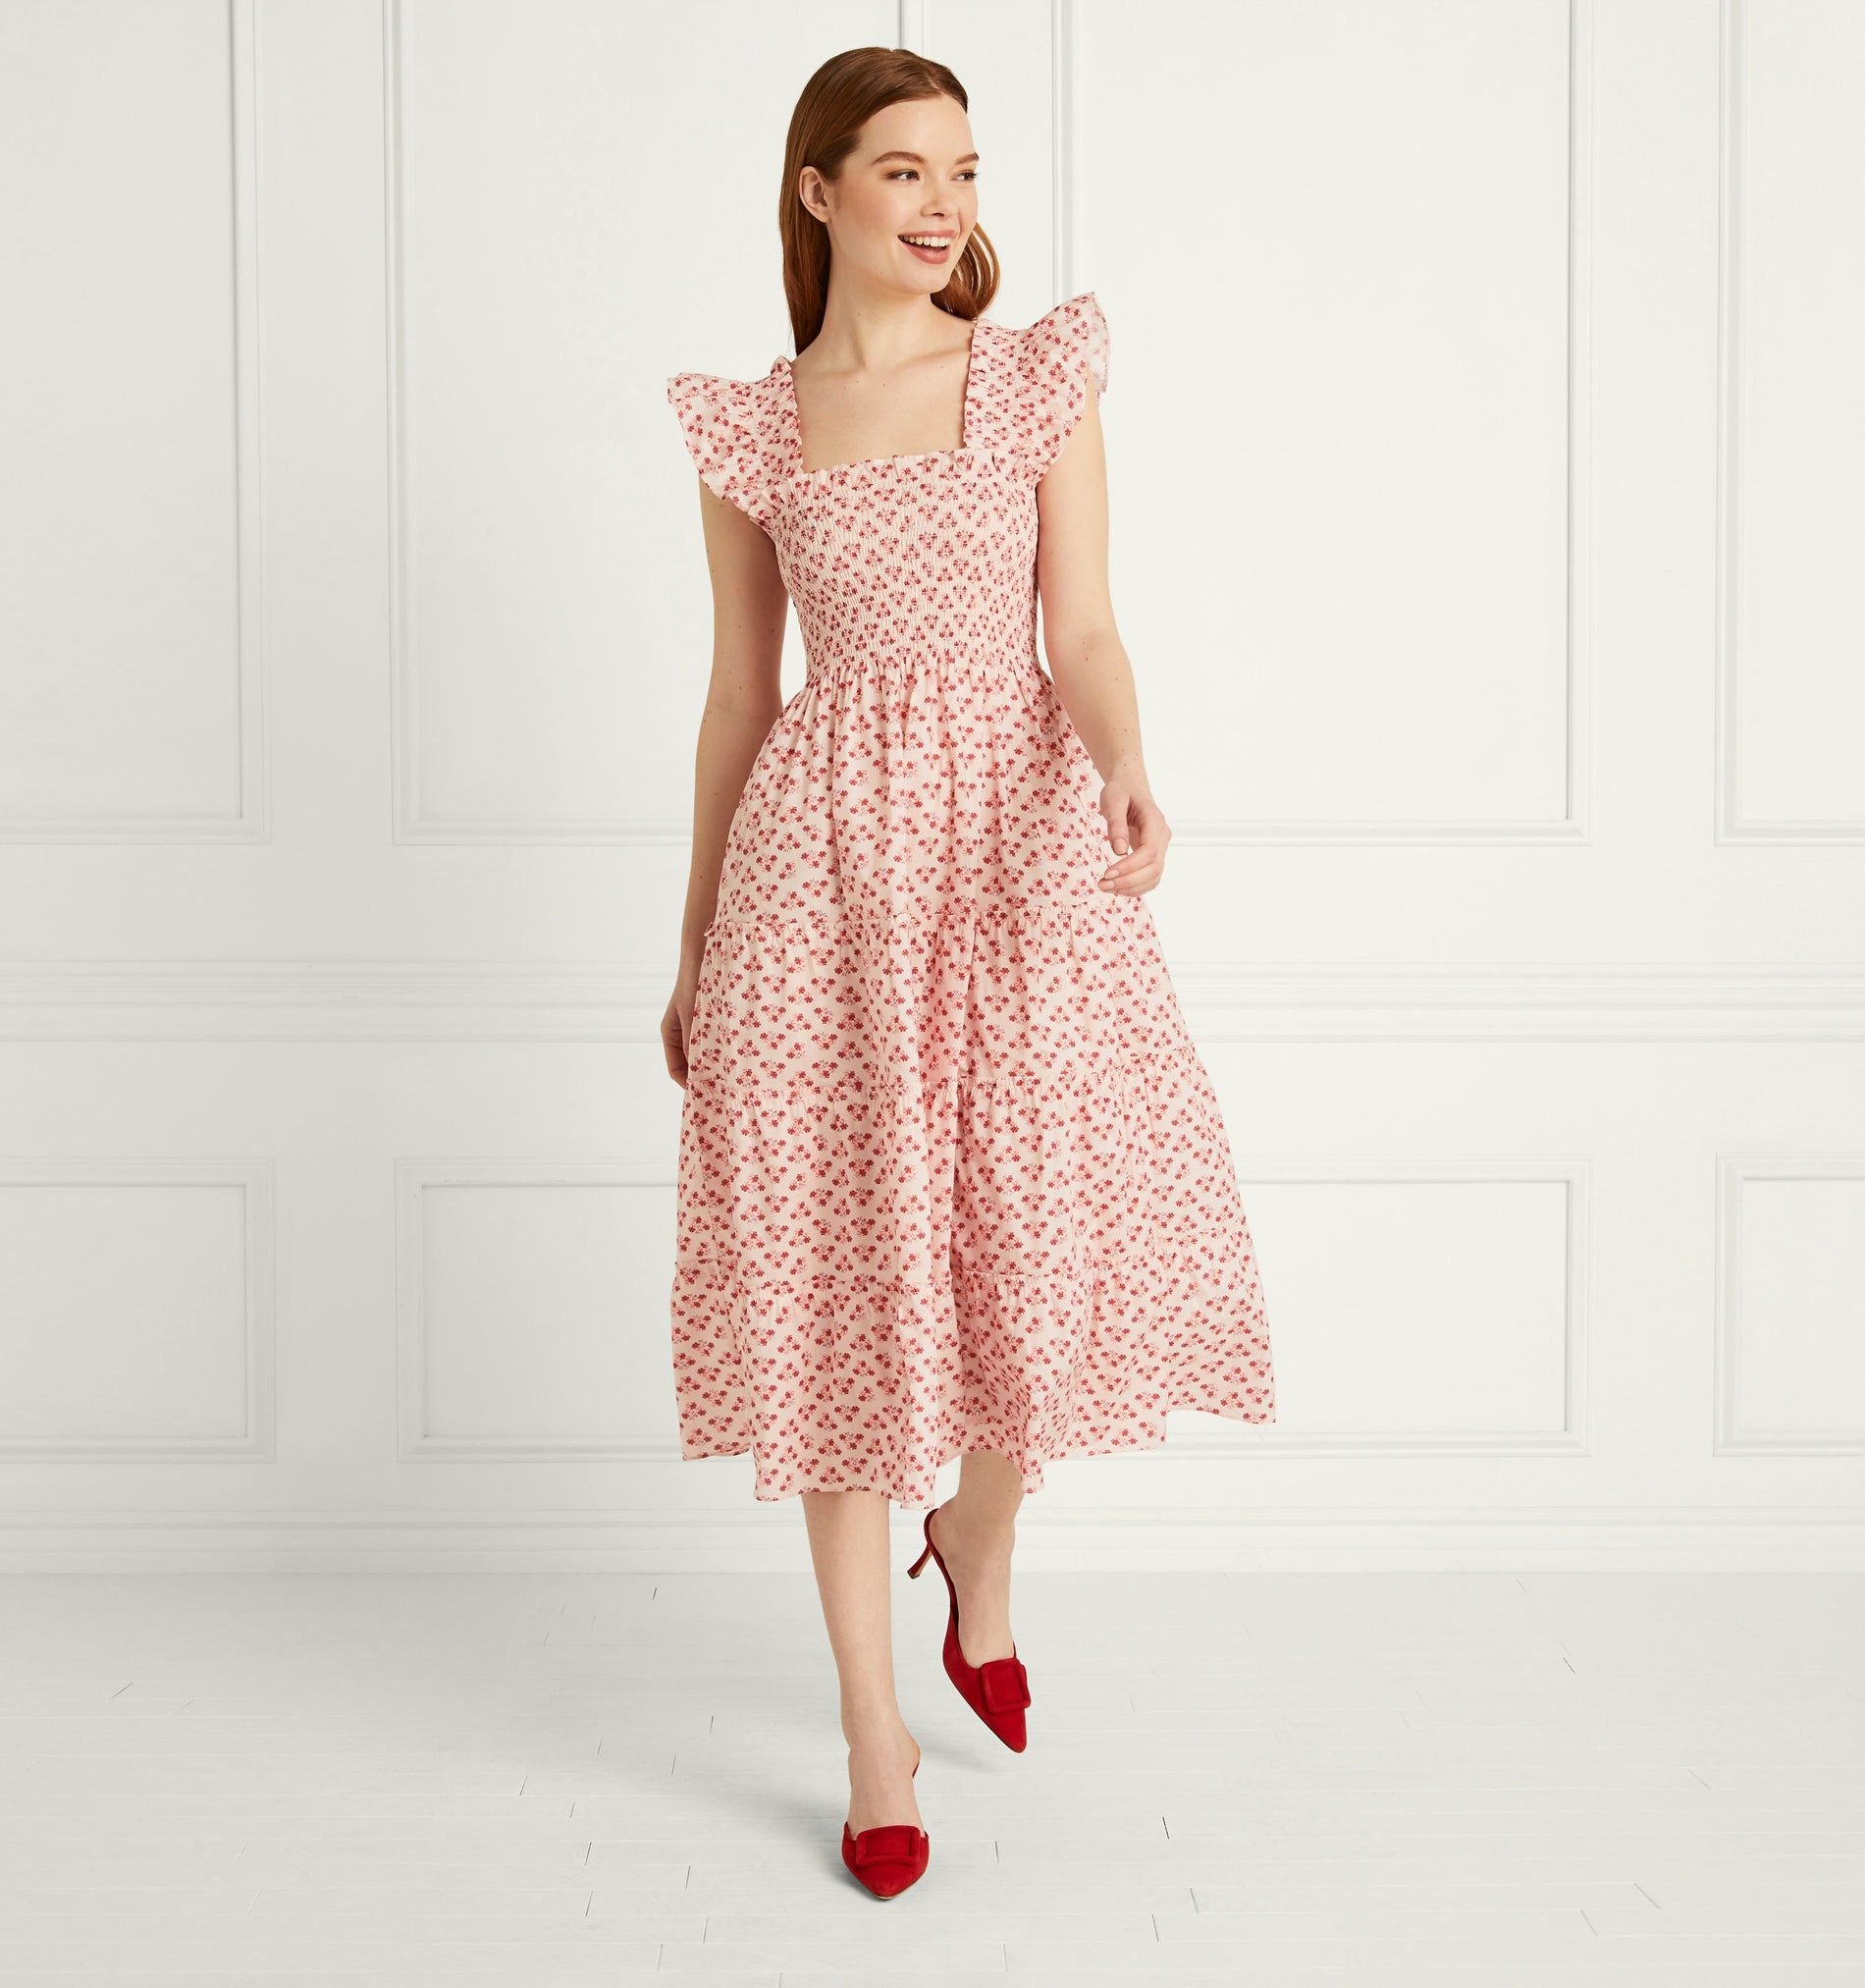 spring dress for woman